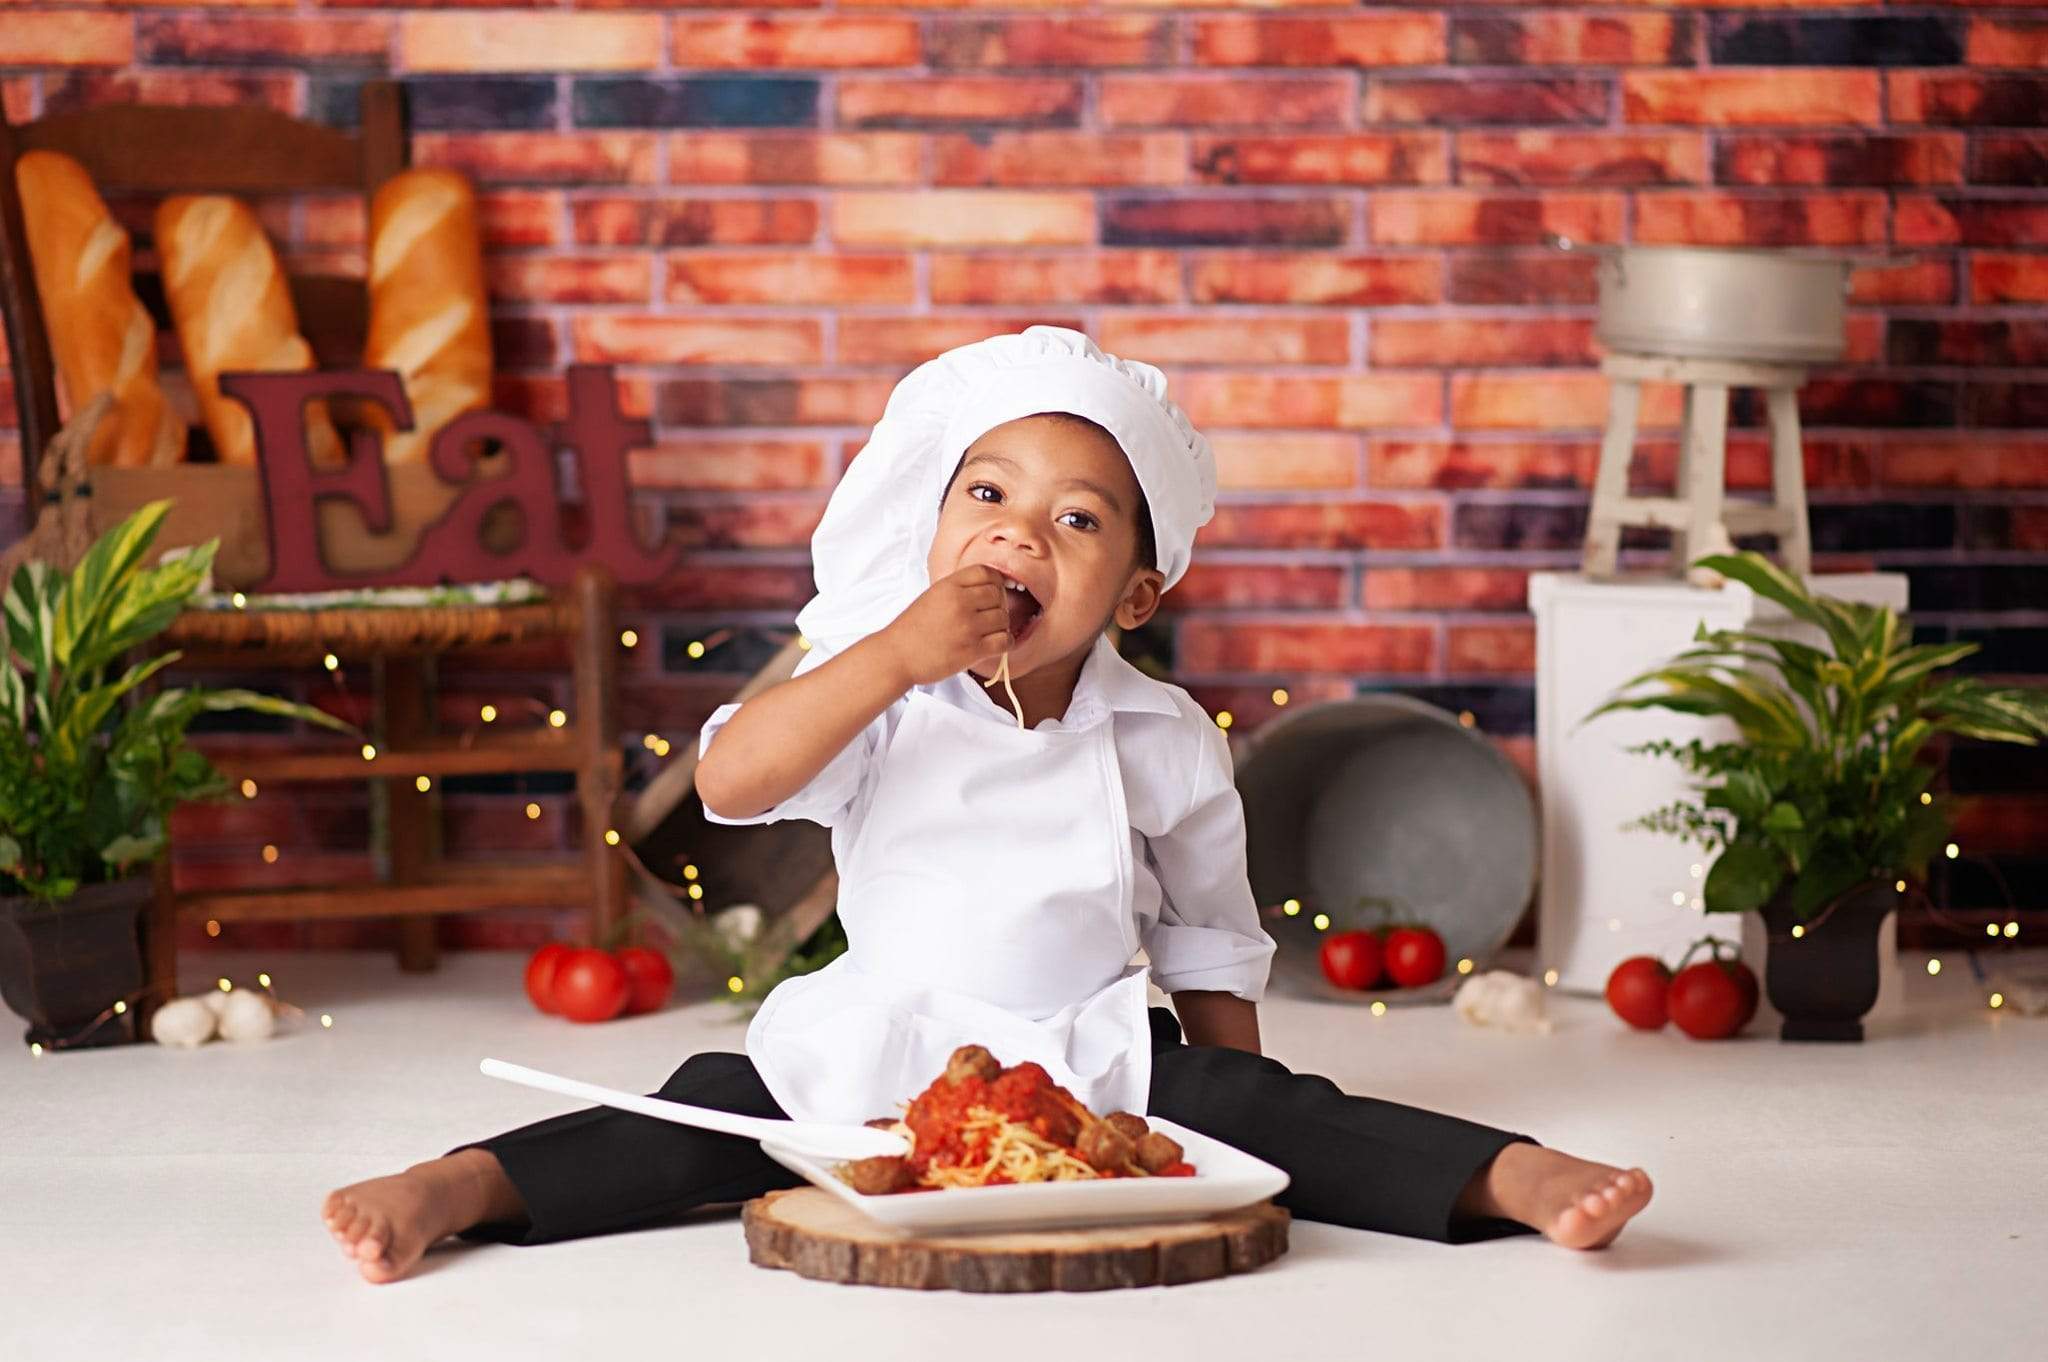 Boy in chef costume eating noodles in front of red brick wall backdrop